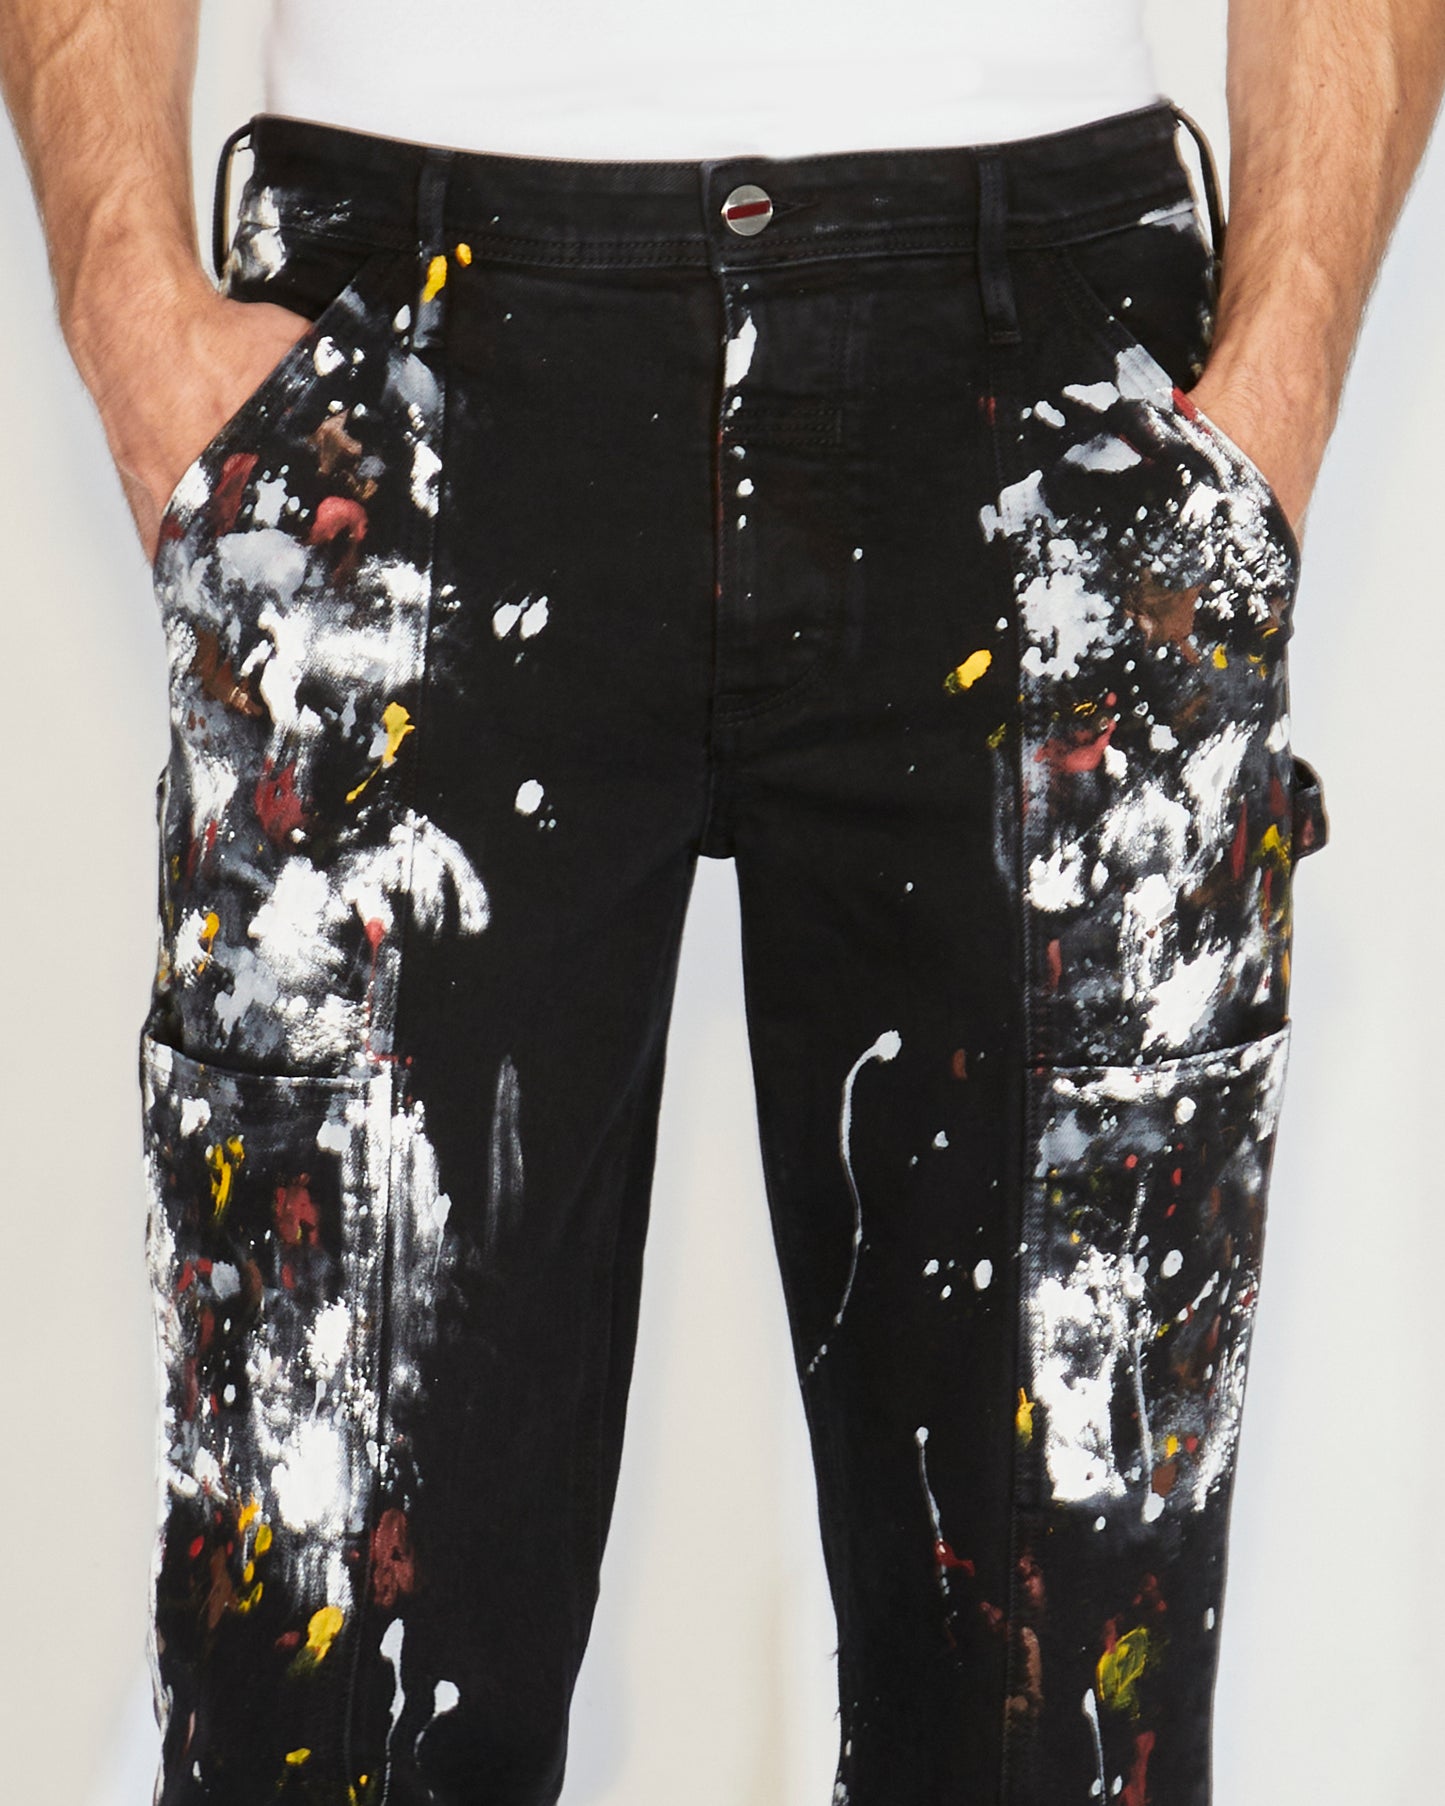 Man standing wearing black pants with paint splatter and a white tee and black shoes